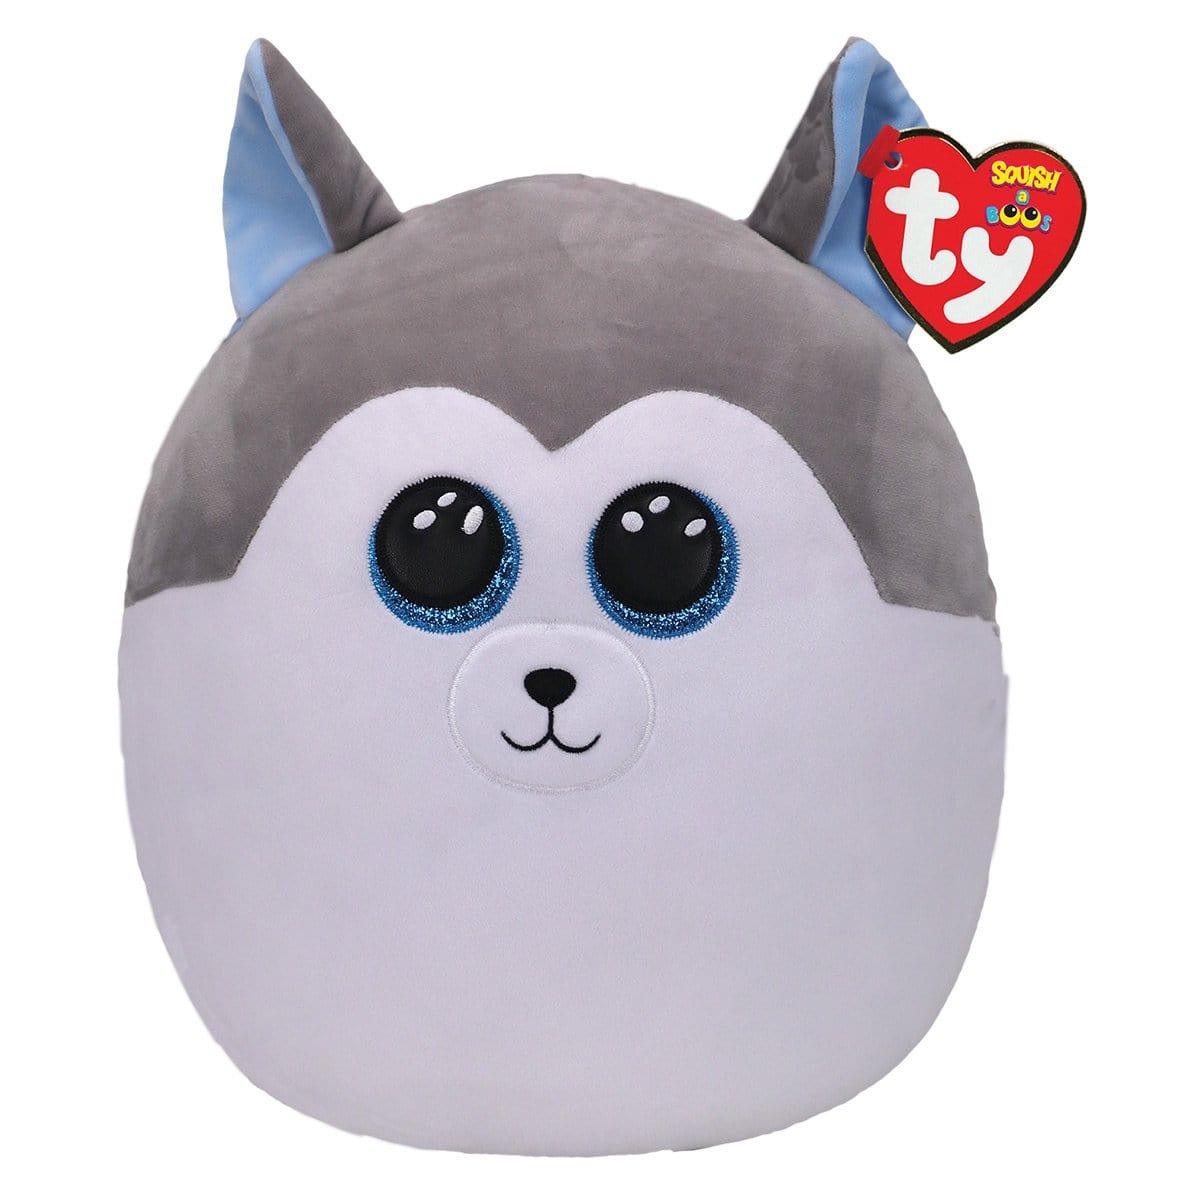 Buy Plushes Slush Squish A Boos, 12 Inches sold at Party Expert